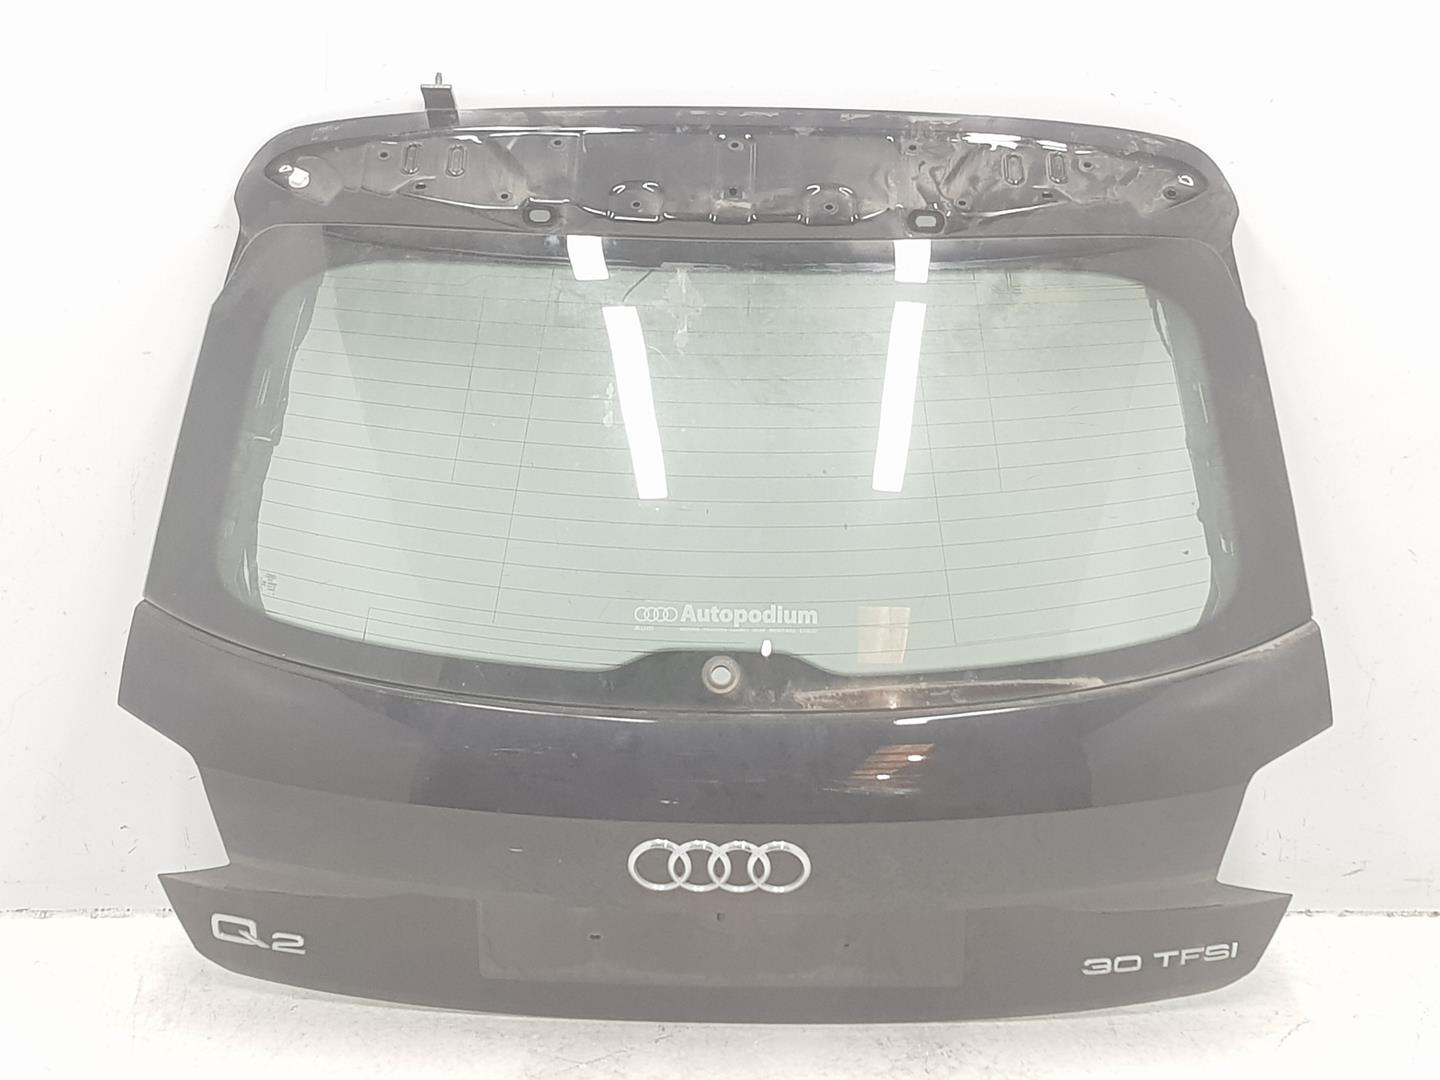 AUDI Q2 1 generation (2016-2024) Bootlid Rear Boot 81A827025E, COLORNEGROY9T 23800378